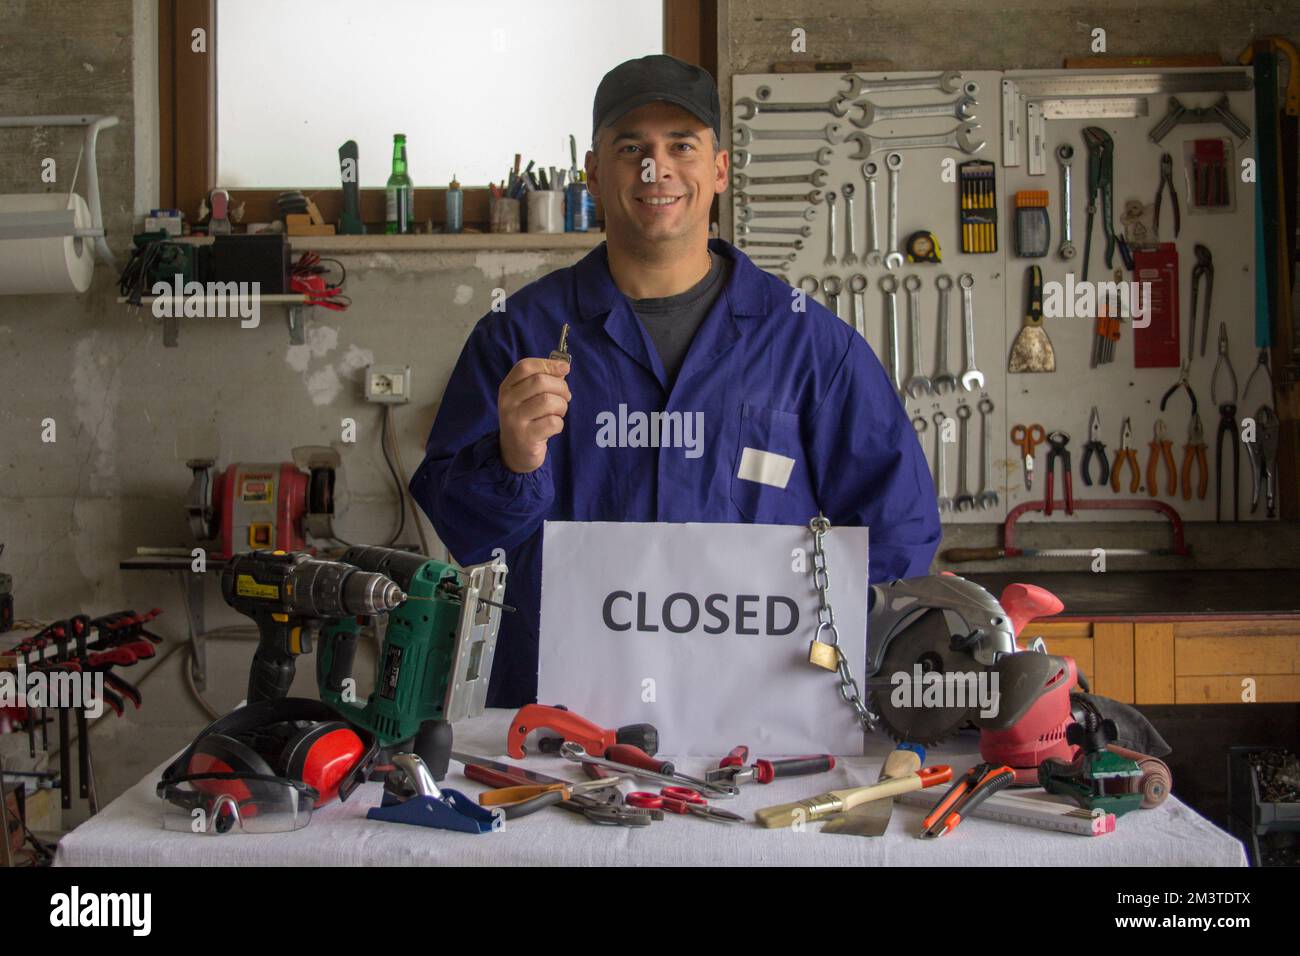 Image of a smiling craftsman in his workshop holding a wrench in his hand and in front of a bench with tools and a closed sign. Reopening of business. Stock Photo